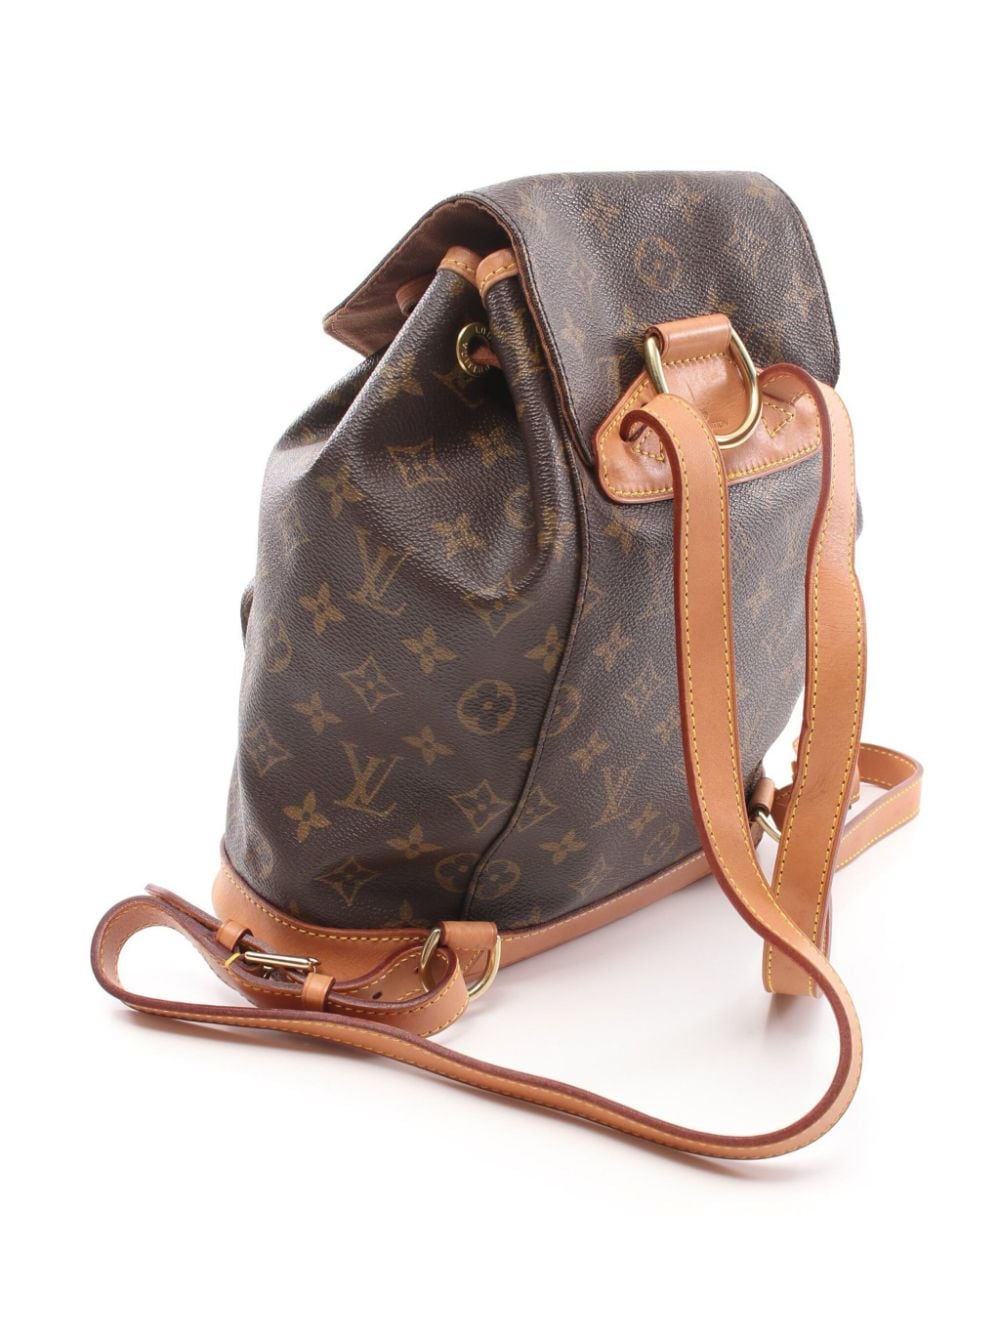 Louis Vuitton 2001 pre-owned Montsouris MM Backpack - Farfetch